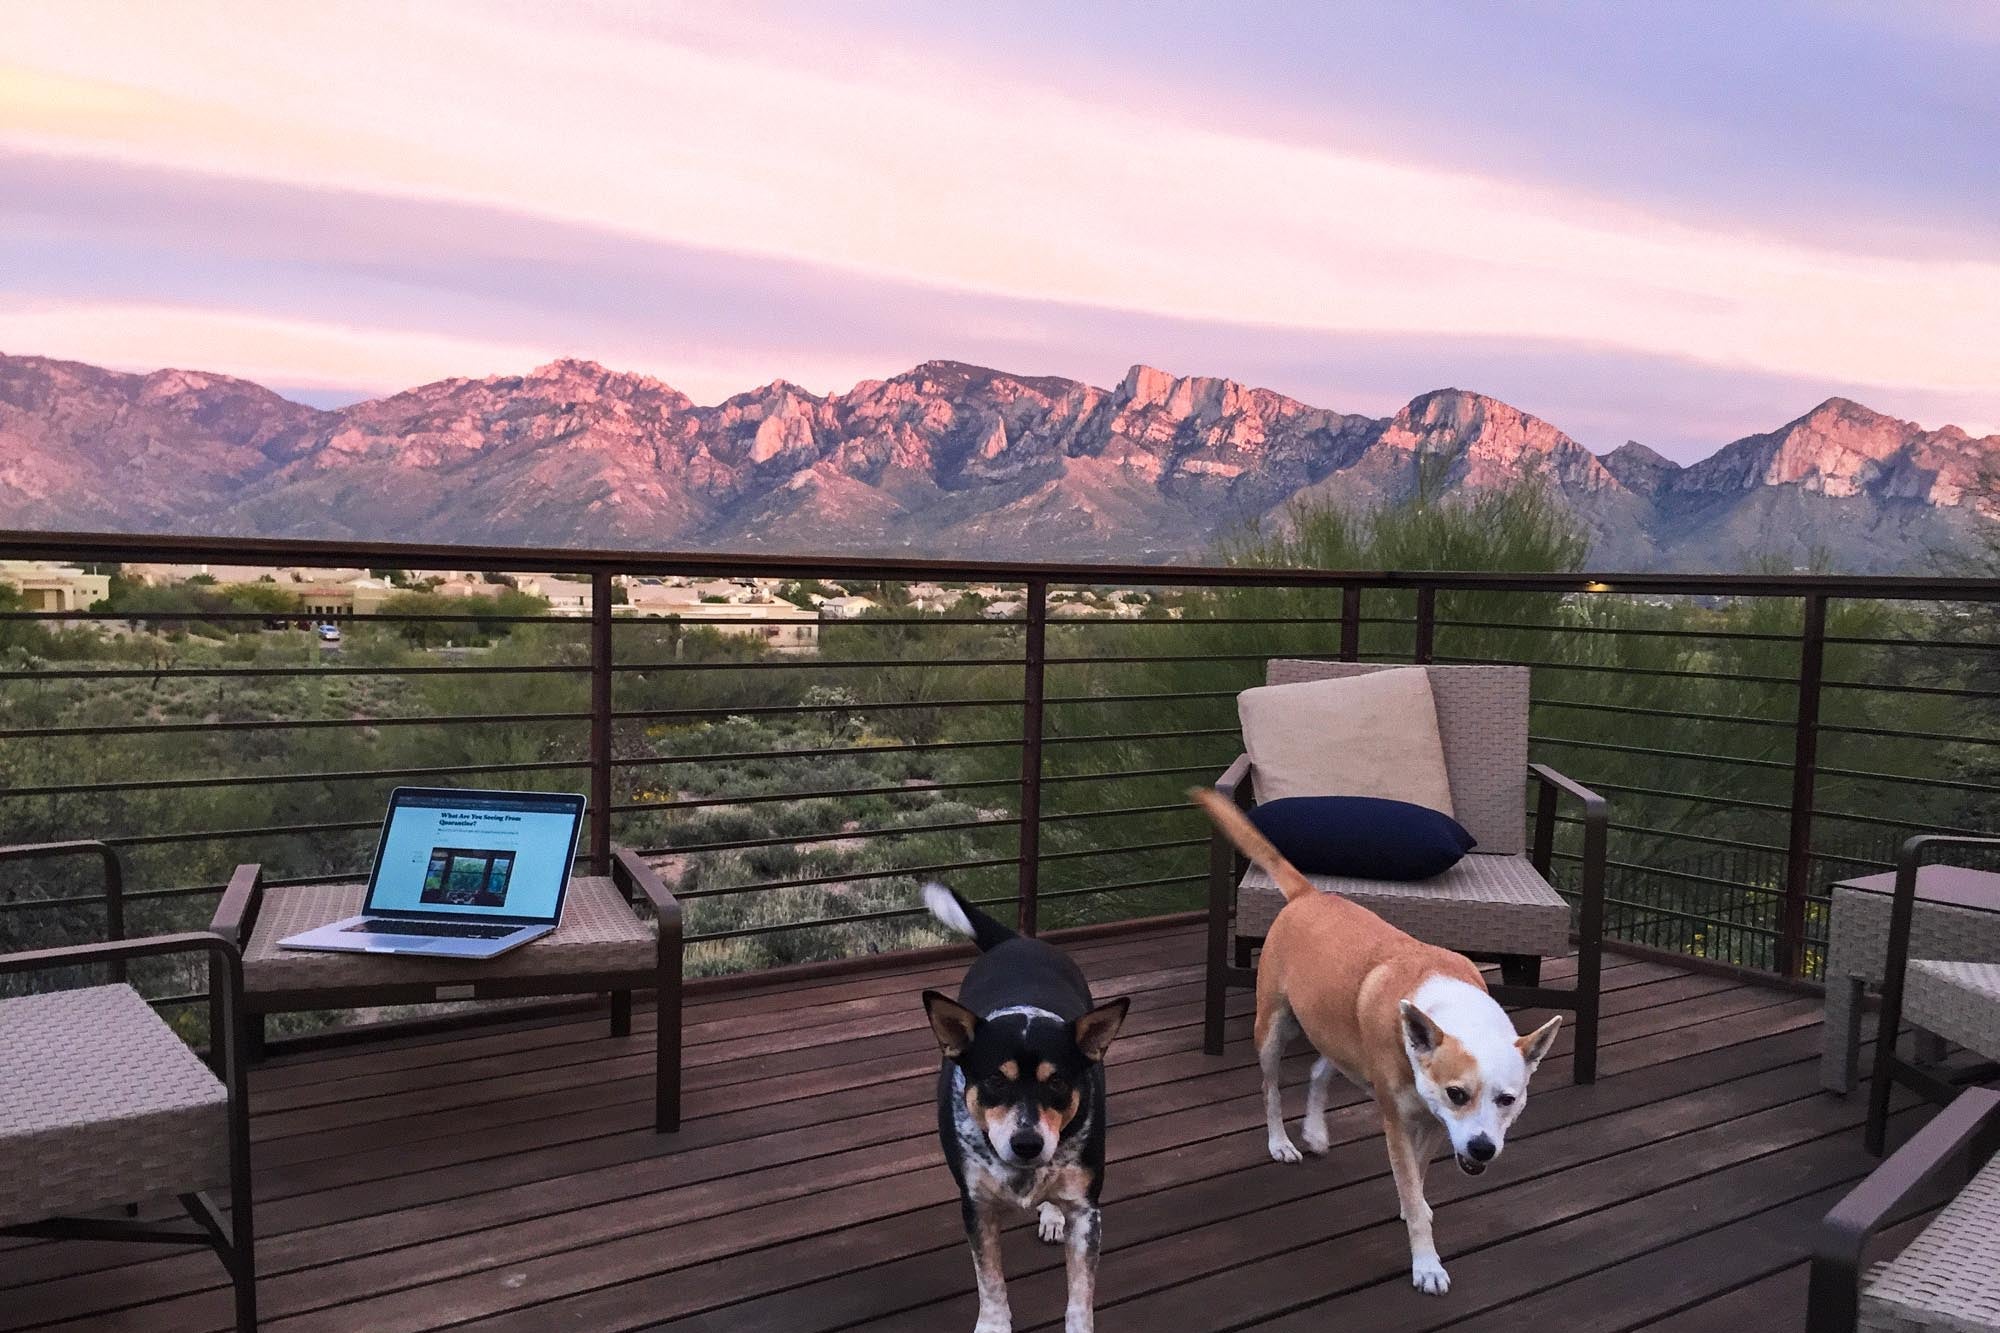 Two dogs on a porch overlooking mountains at sunset.